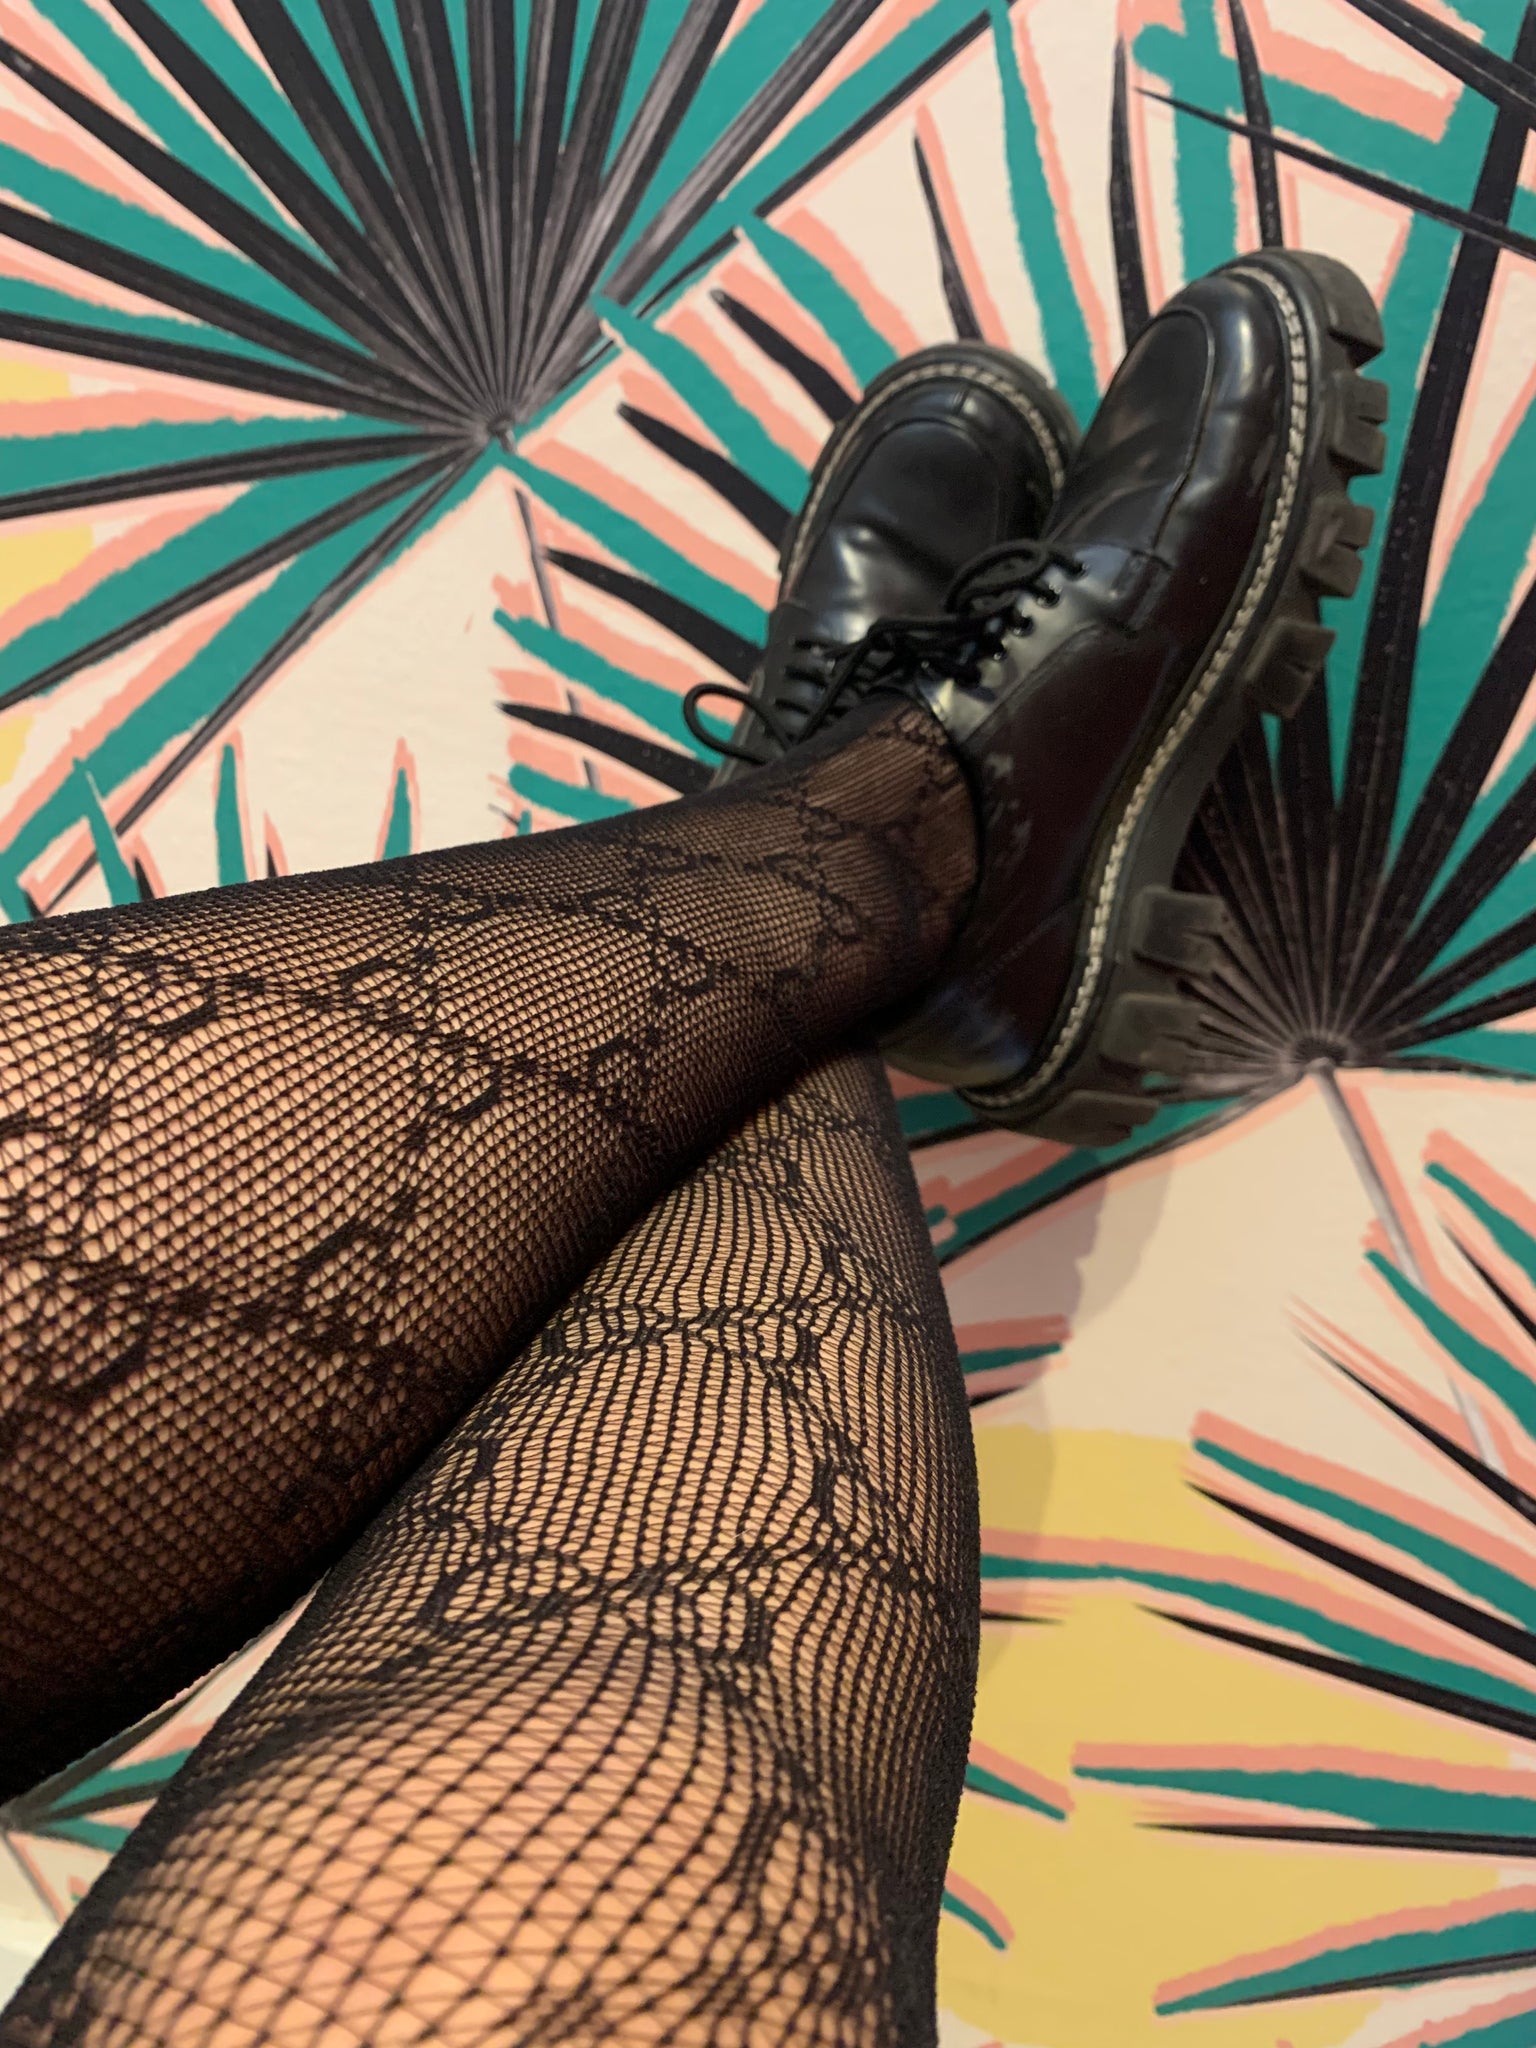 GG TIGHTS – Heart clothing Boutique